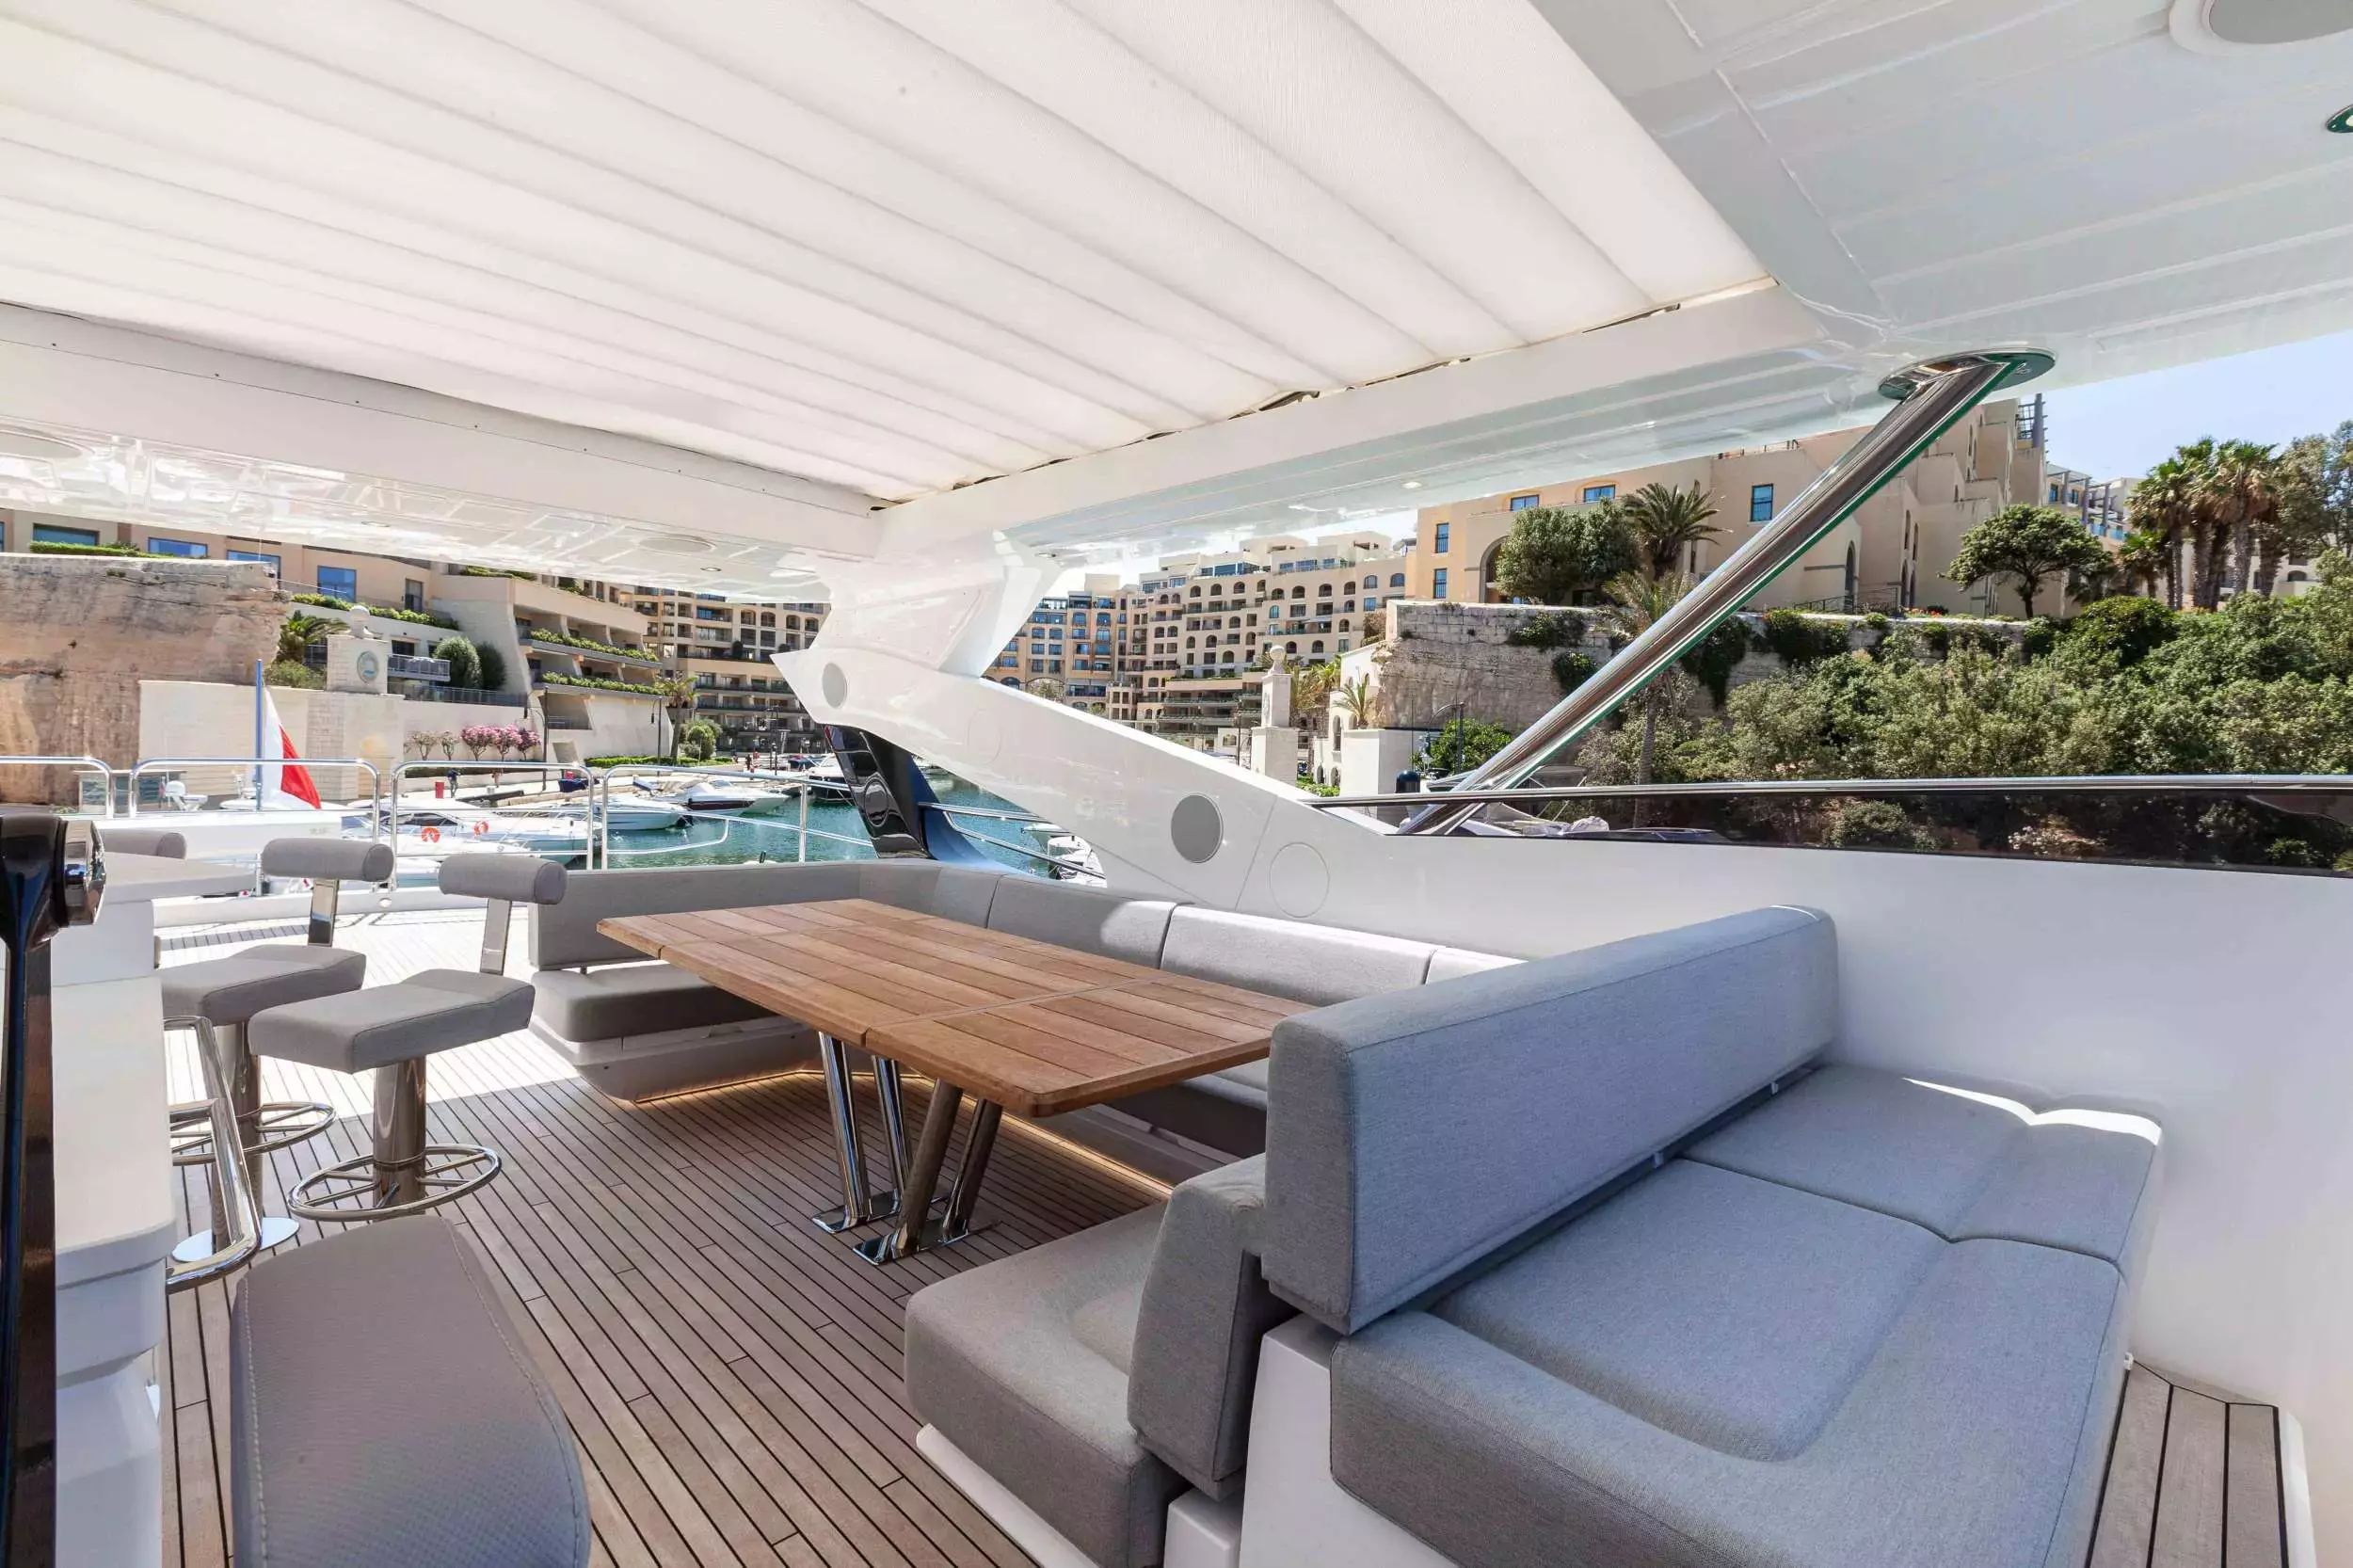 New Edge by Sunseeker - Top rates for a Rental of a private Superyacht in Cyprus